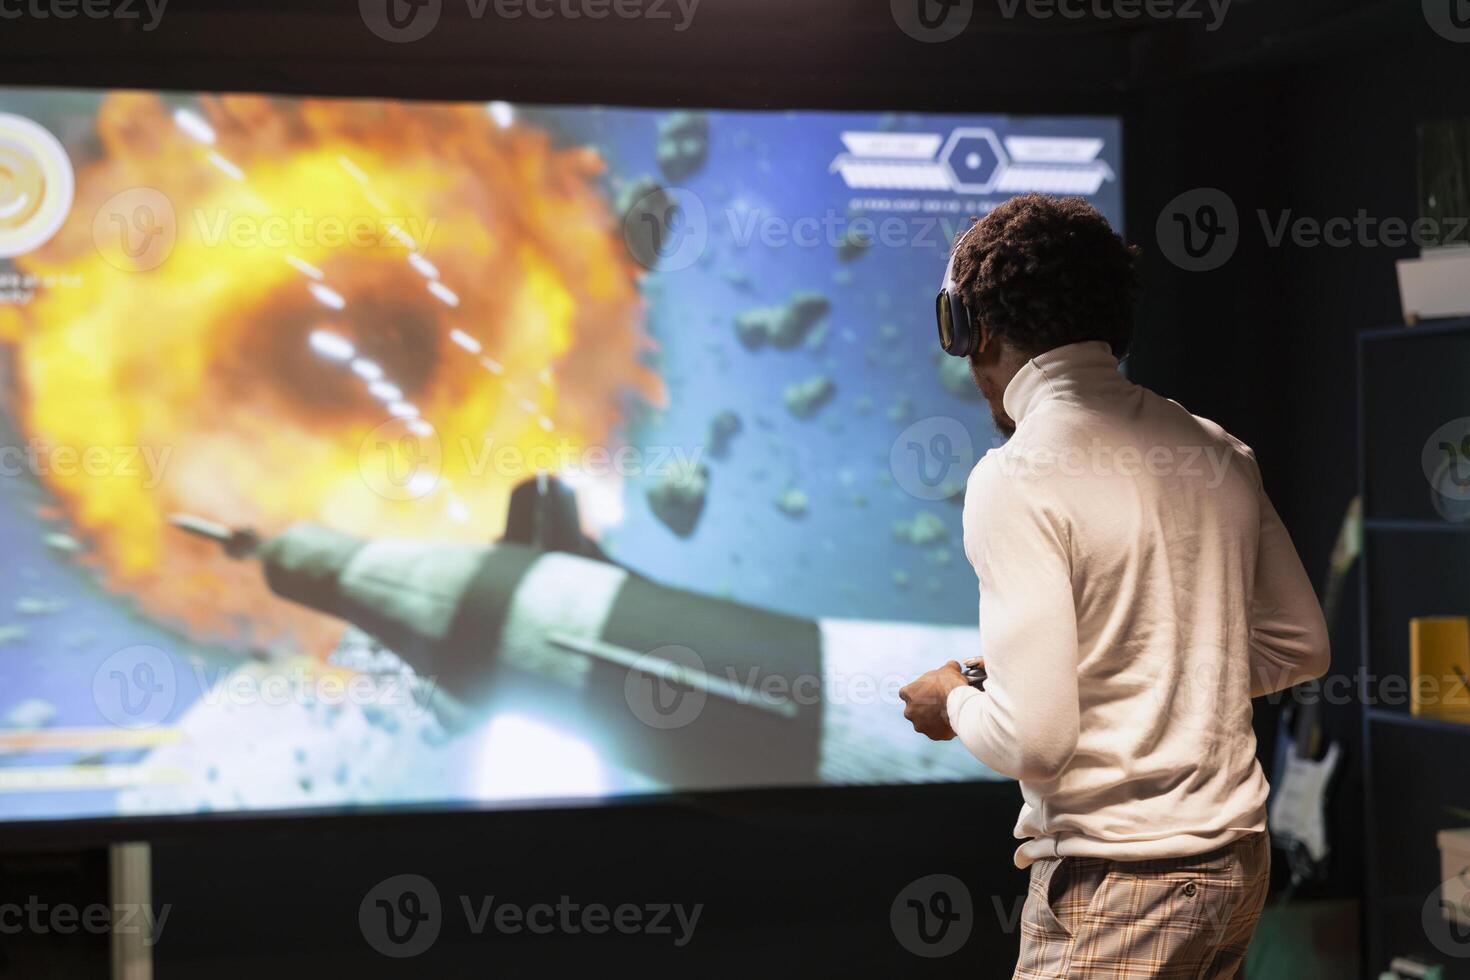 Gamer at home gaming and enjoying leisure time using high quality projector to display gameplay. Man standing up in front of ultrawide screen, playing videogame using controller photo